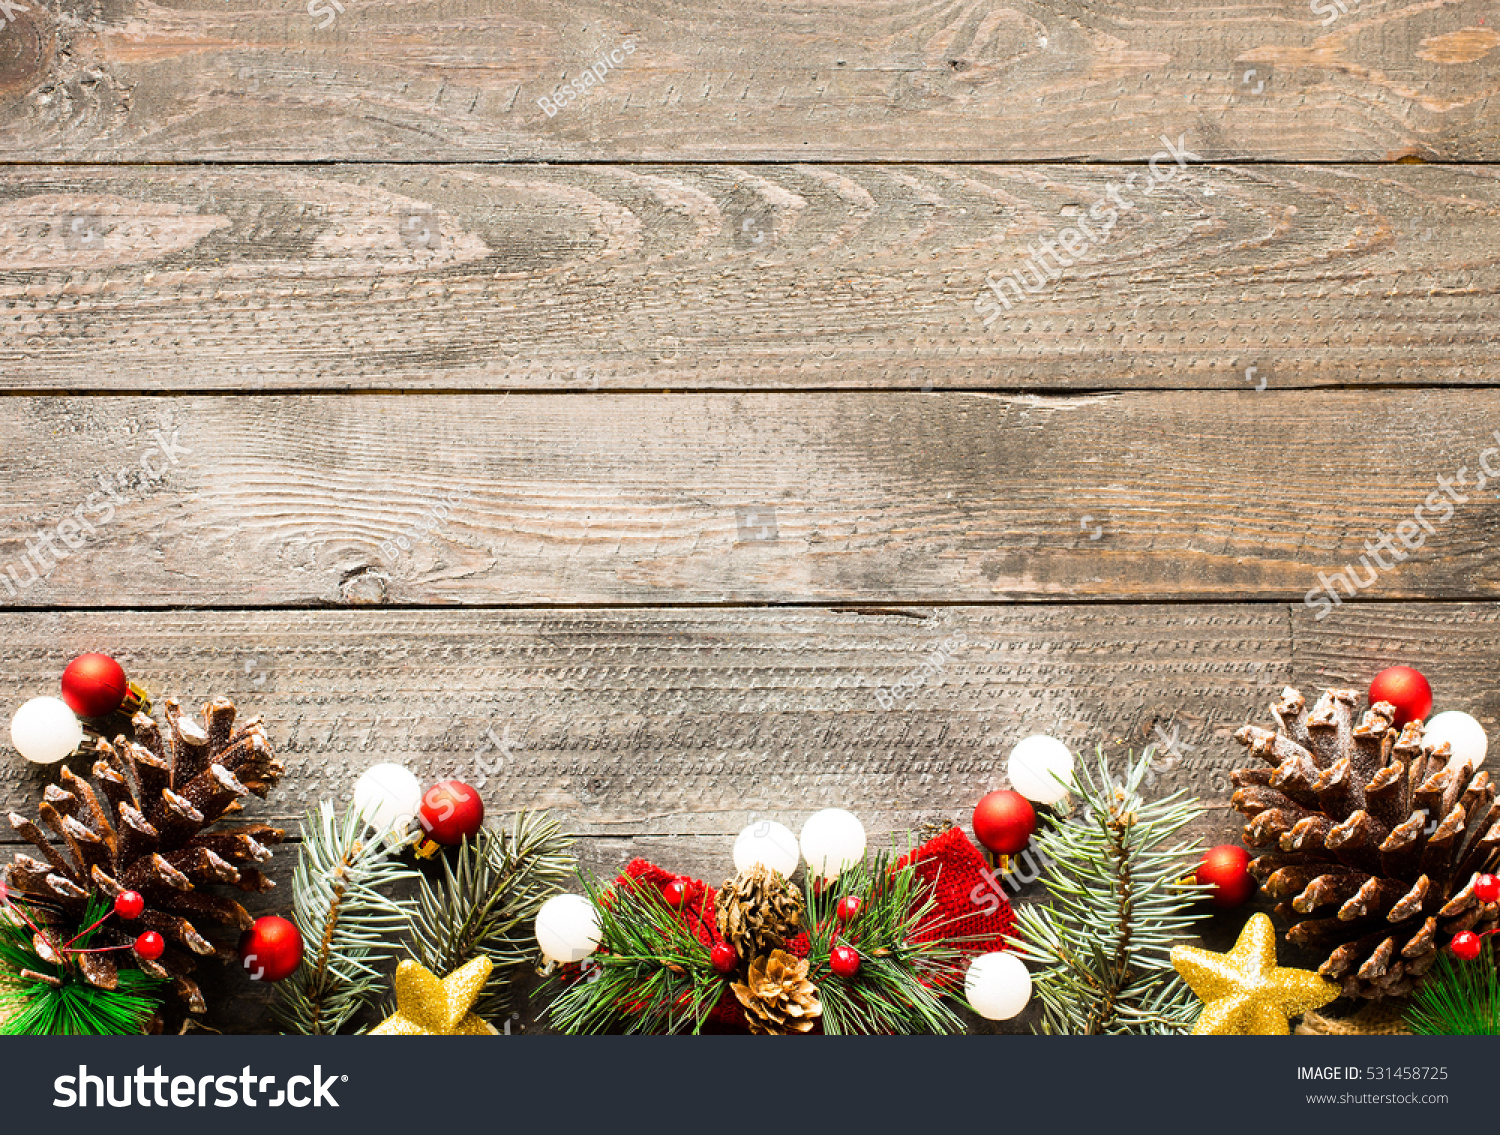 Christmas Holiday Background With Ornaments Like Cookies And Oranges On ...